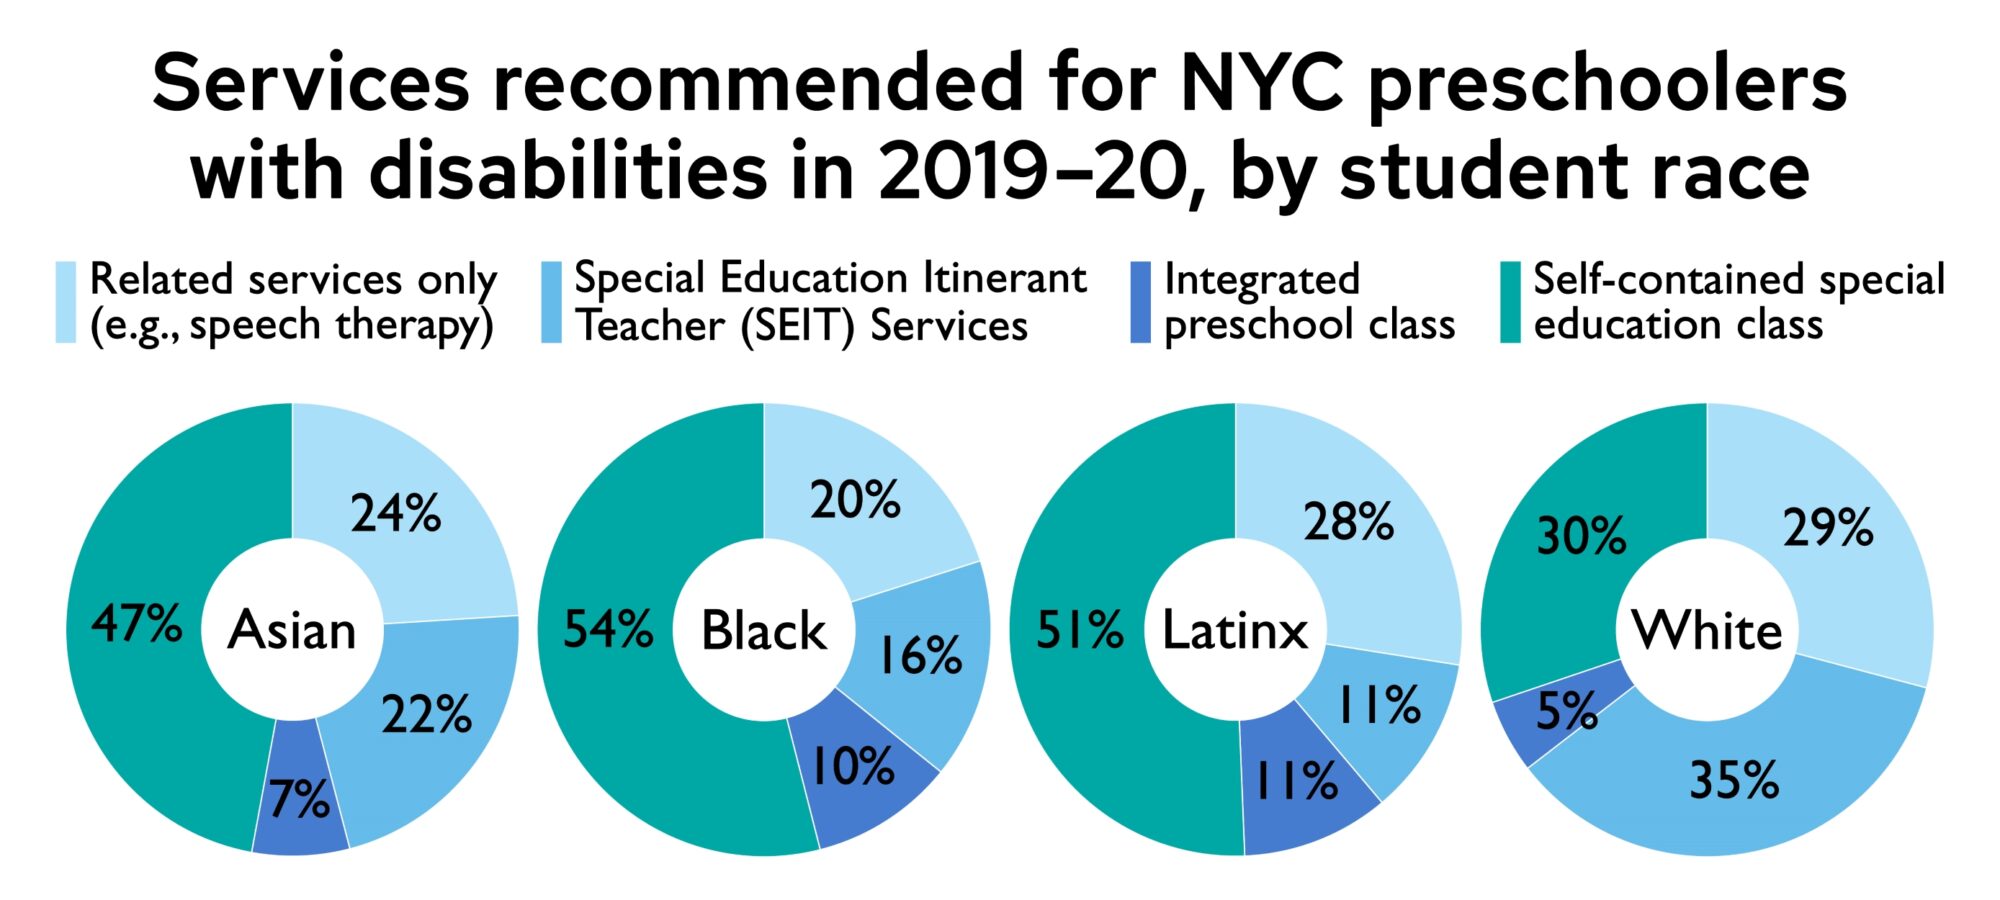 Four pie charts showing the breakdown of services recommended for NYC preschoolers with disabilities in 2019-20, by student race. 47% of Asian students, 54% of Black students, and 51% of Latinx students had IEP recommending a self-contained special class, compared to 30% of White students. White children were recommended for special education itinerant teacher (SEIT) services at three times the rate of Latinx preschoolers and more than twice the rate of Black preschoolers.